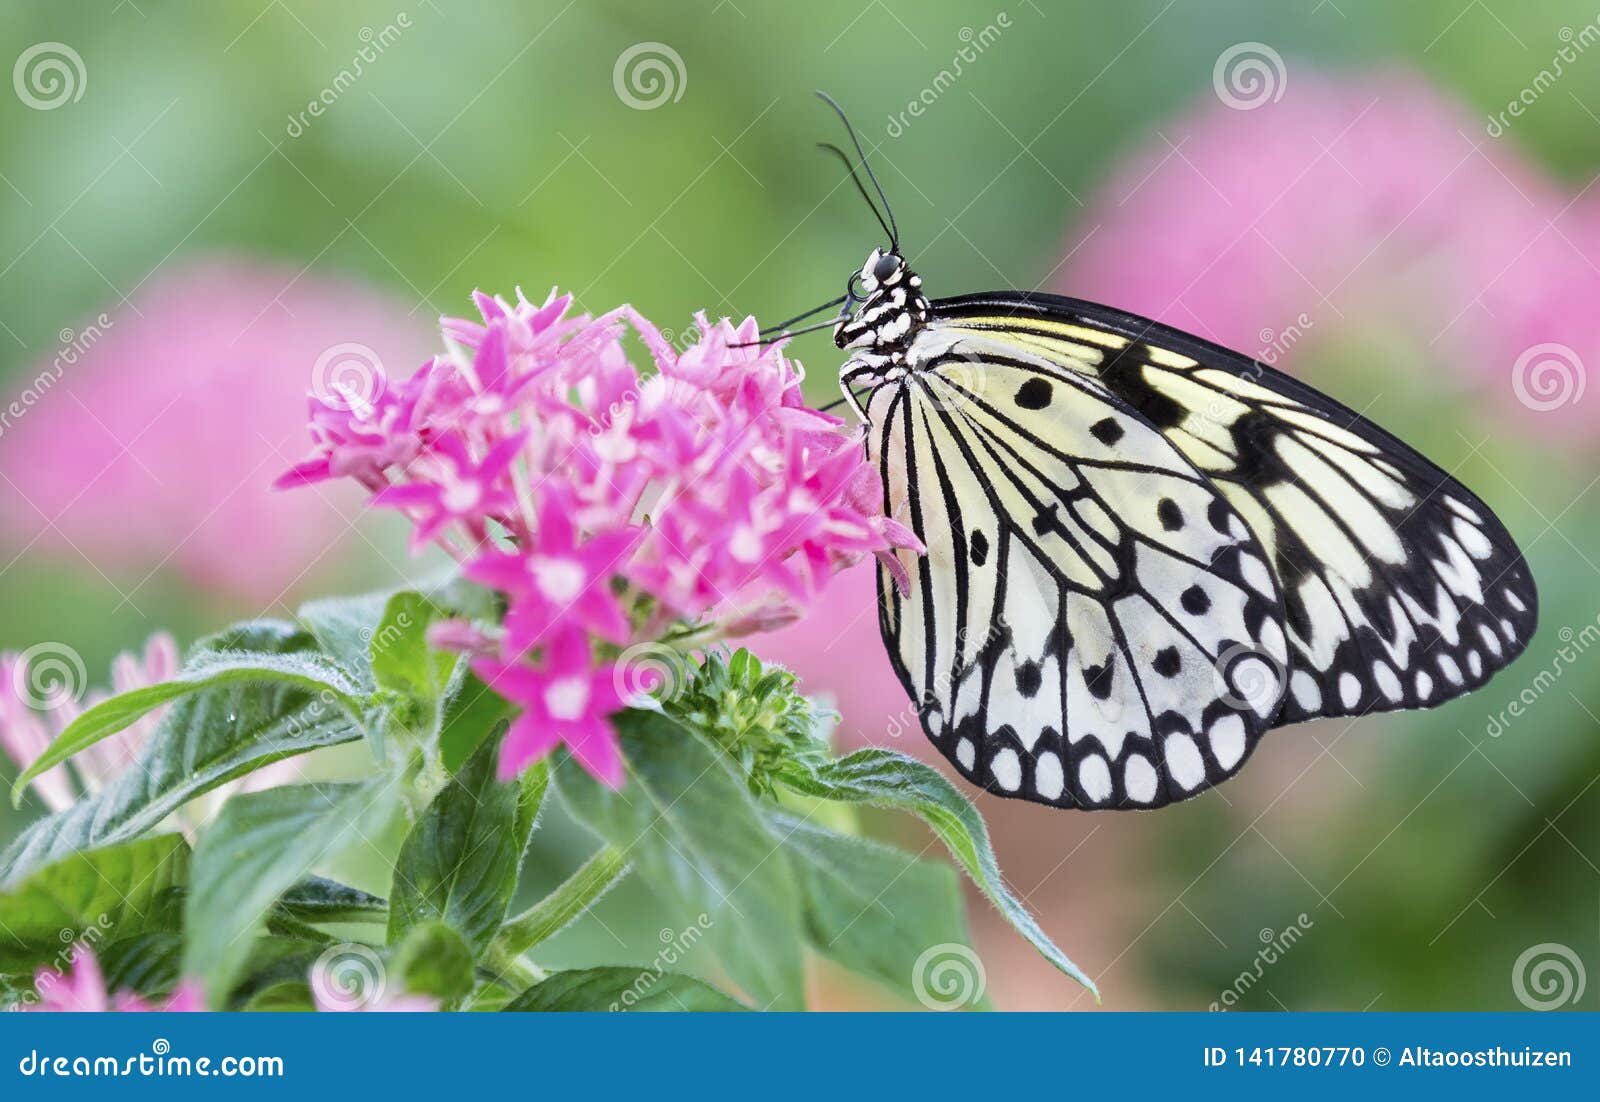 Macro Of A Black And White Butterfly Sitting On Pink Flowers Stock